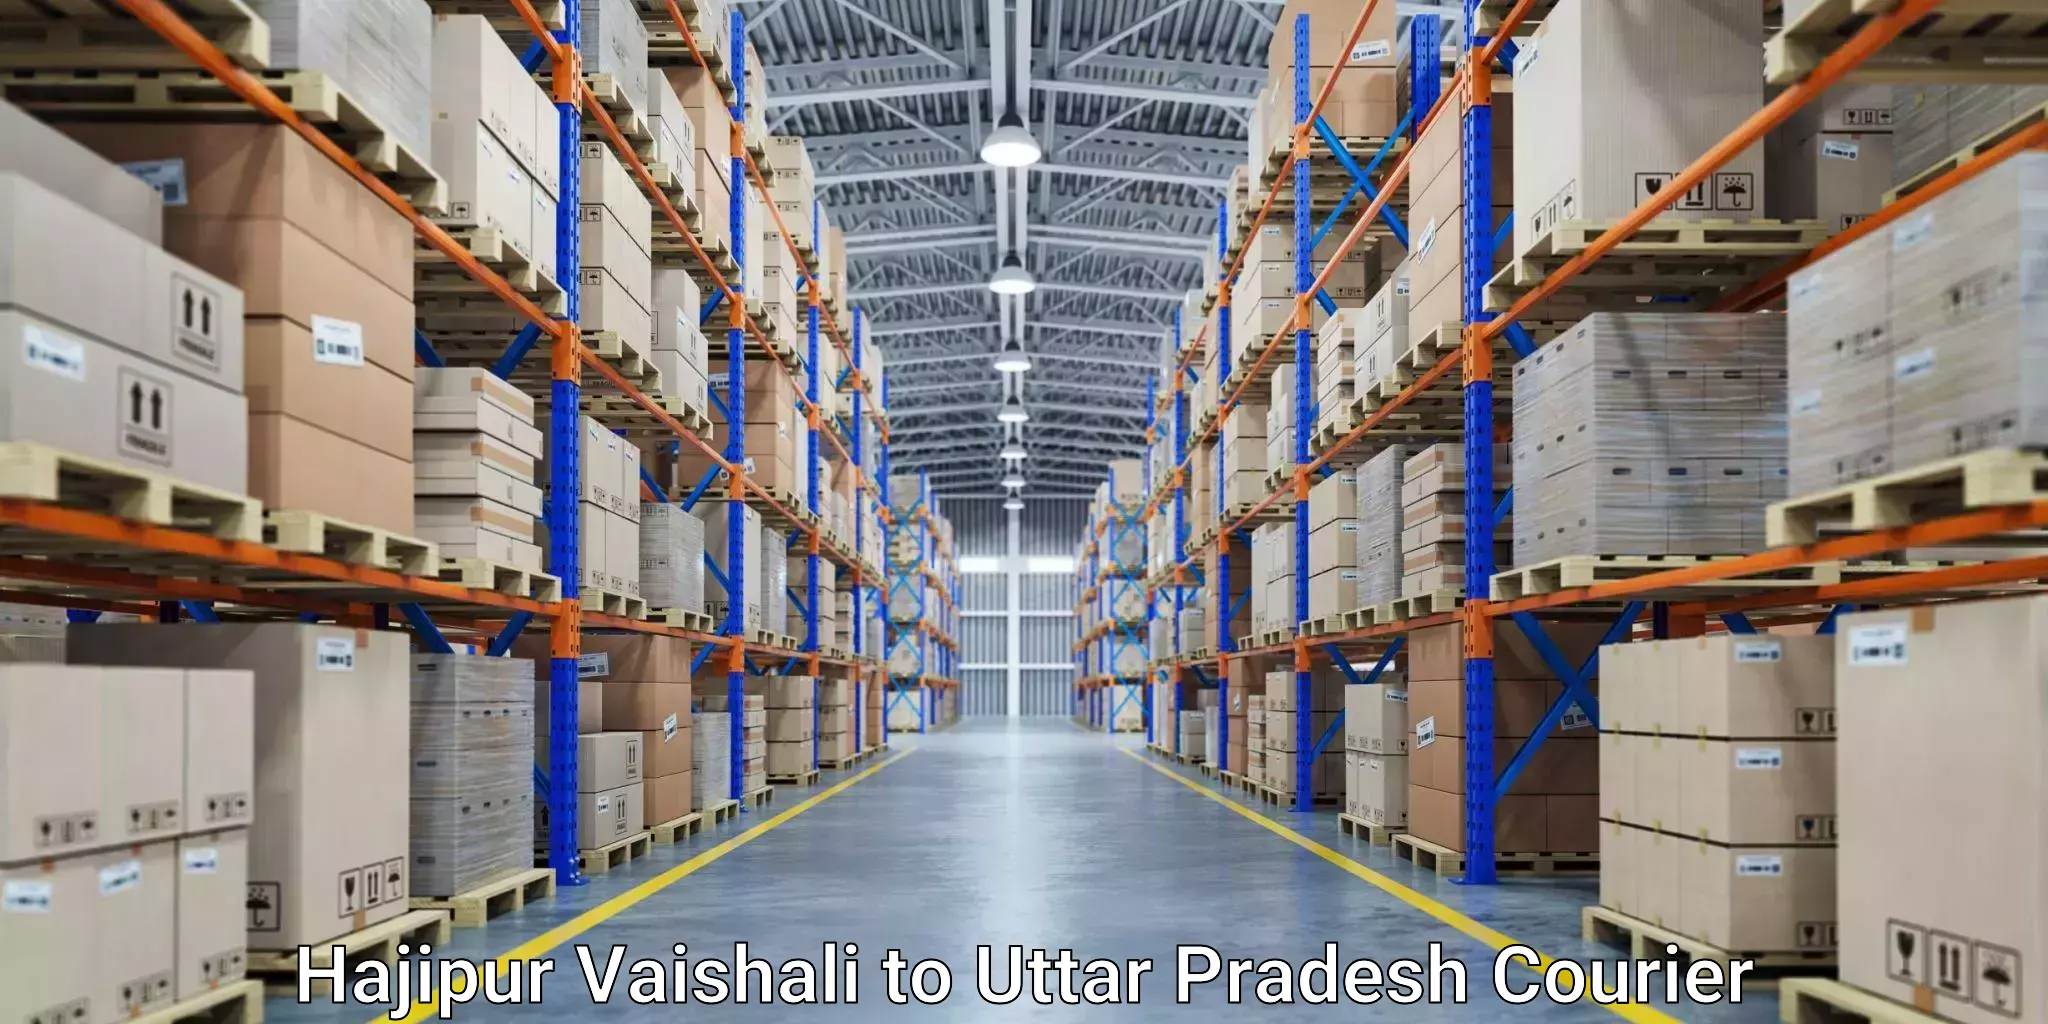 Round-the-clock parcel delivery Hajipur Vaishali to Babatpur